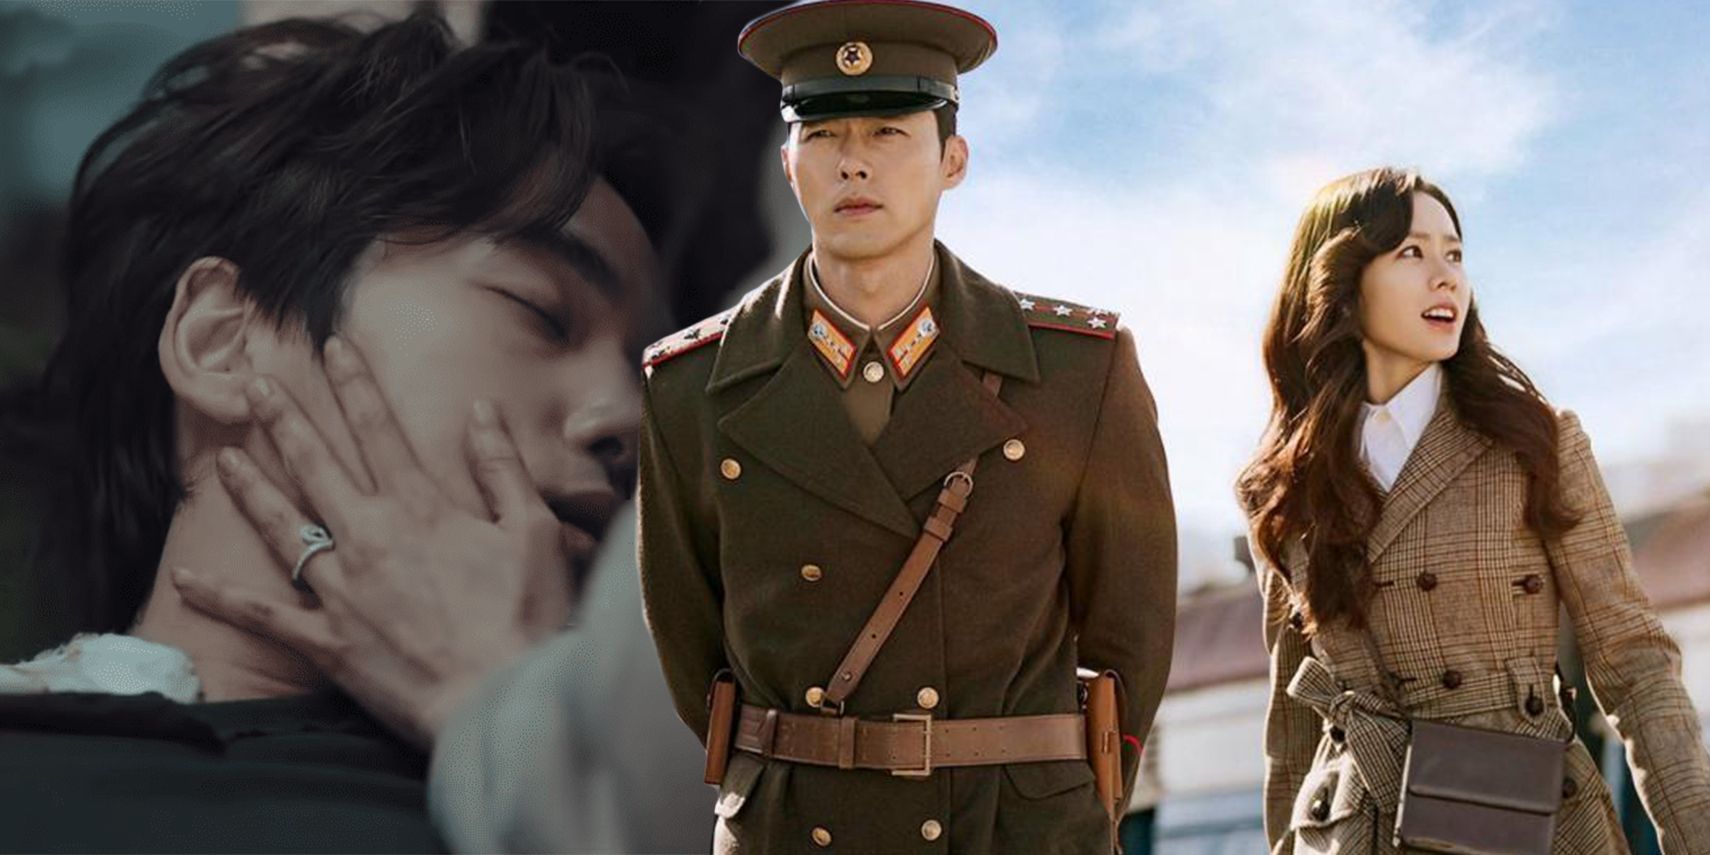 15 Most Memorable Scenes From The Hit K-Drama “Crash Landing On